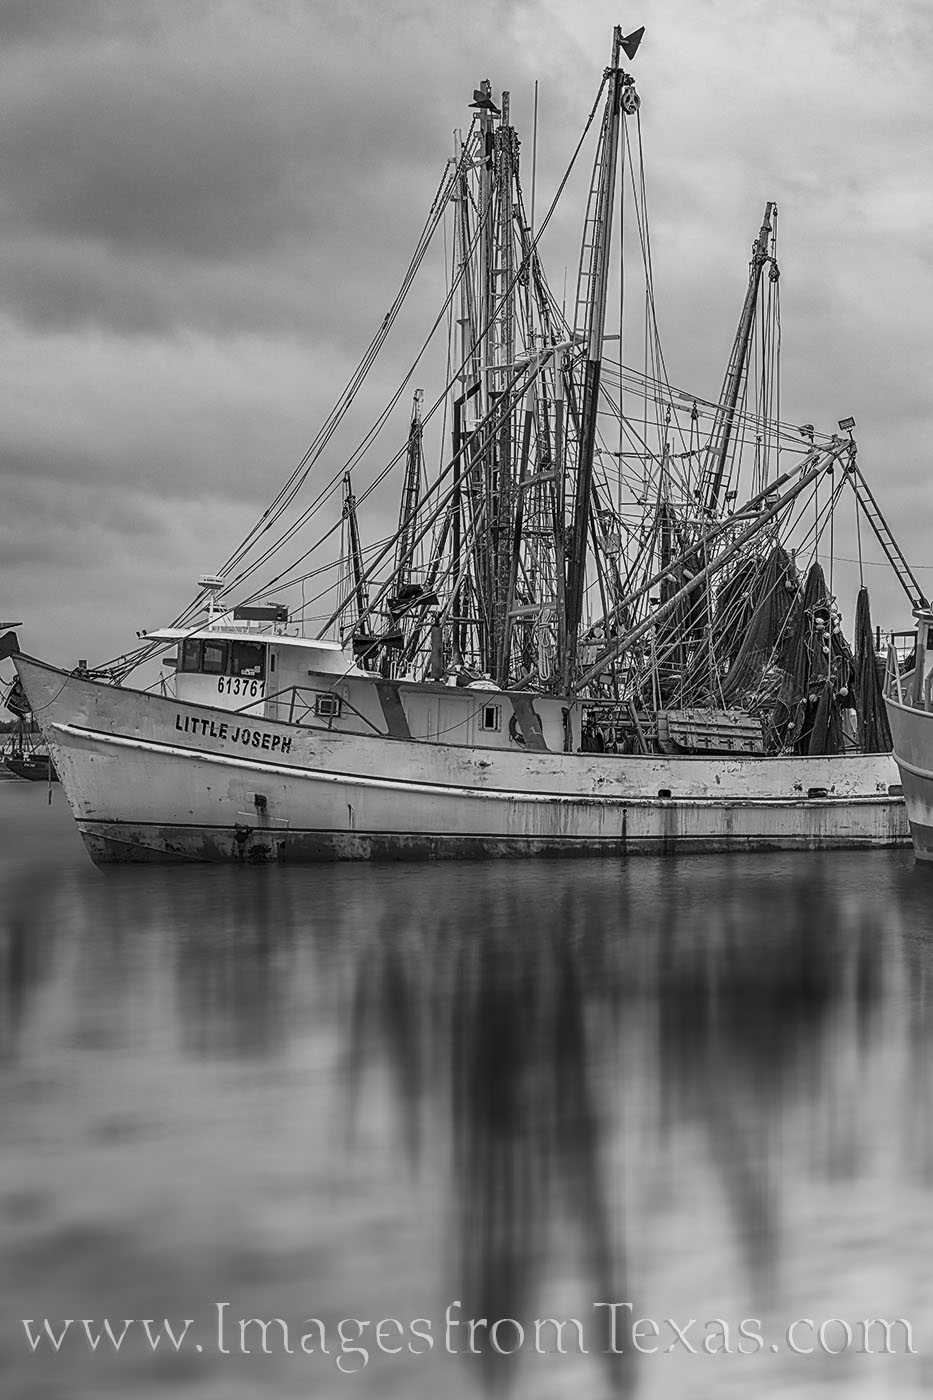 The shrimp boat, the Little Joseph, rests in a harbor in Port Isabel near South Padre Island on a peaceful and quiet morning....